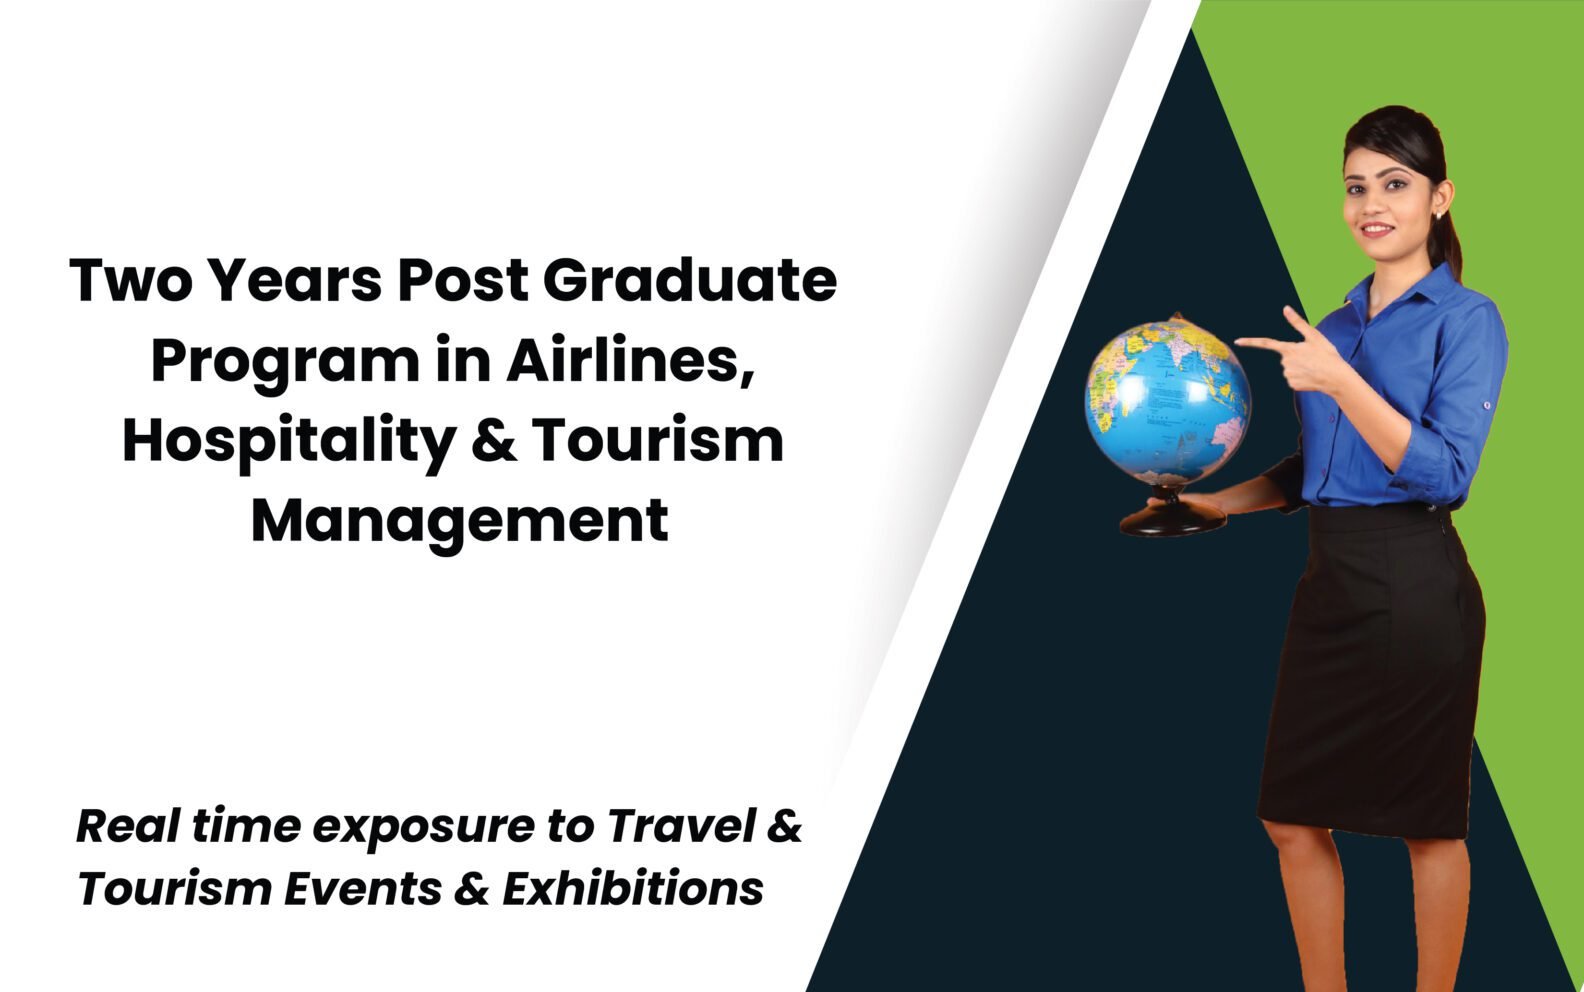 Two Years Post Graduate Program In Airlines Hospitality & Tourism Management